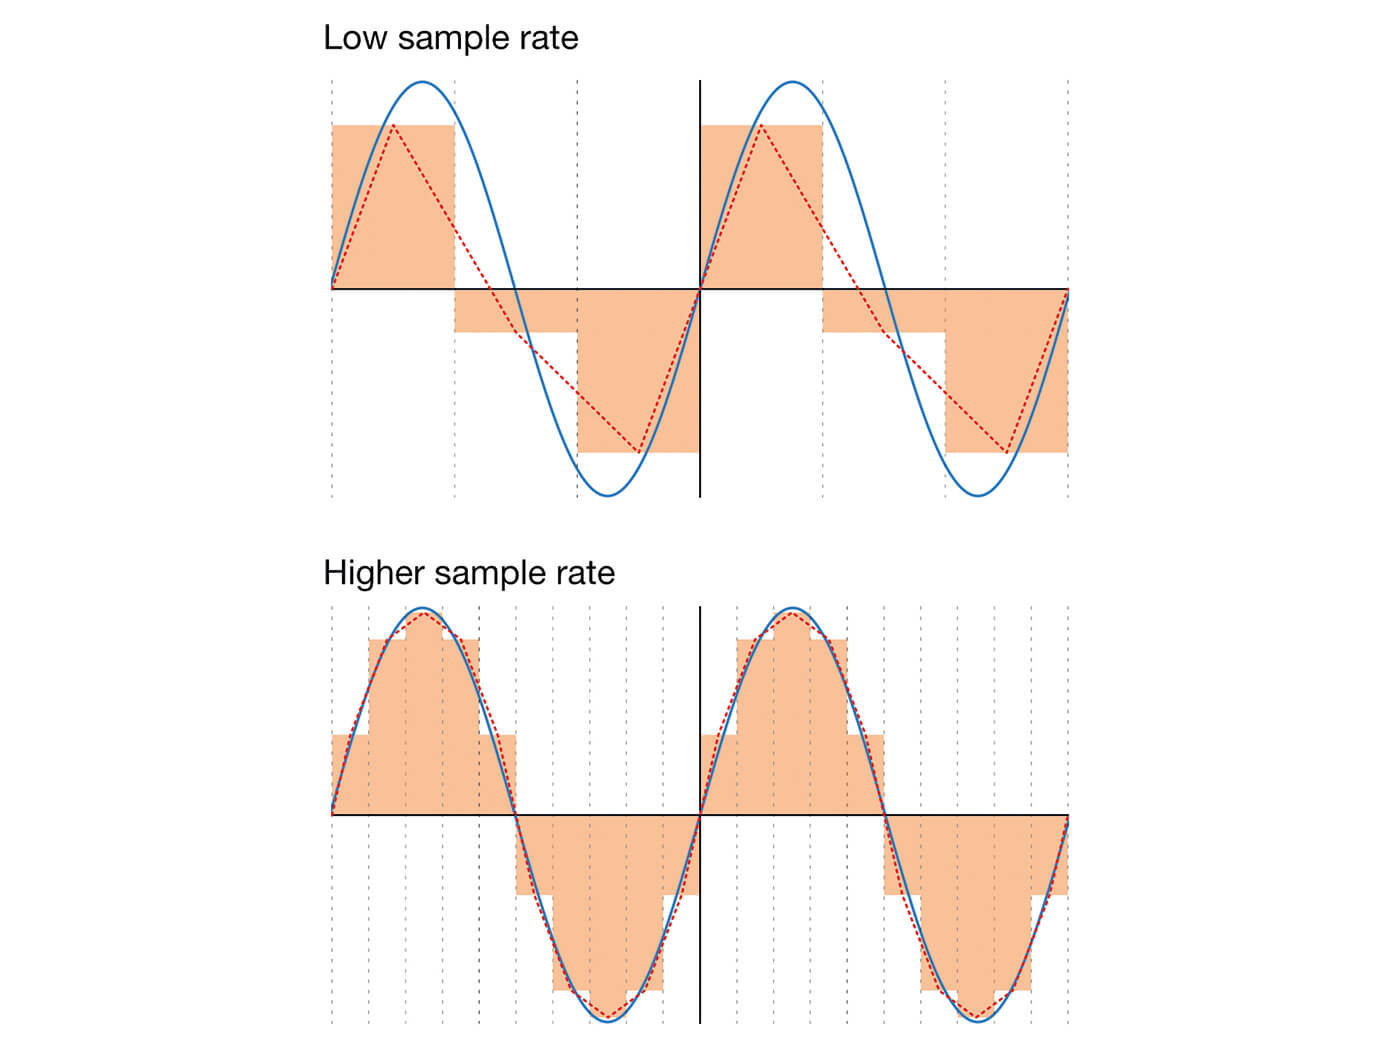 The science of signal sampling, antialiasing